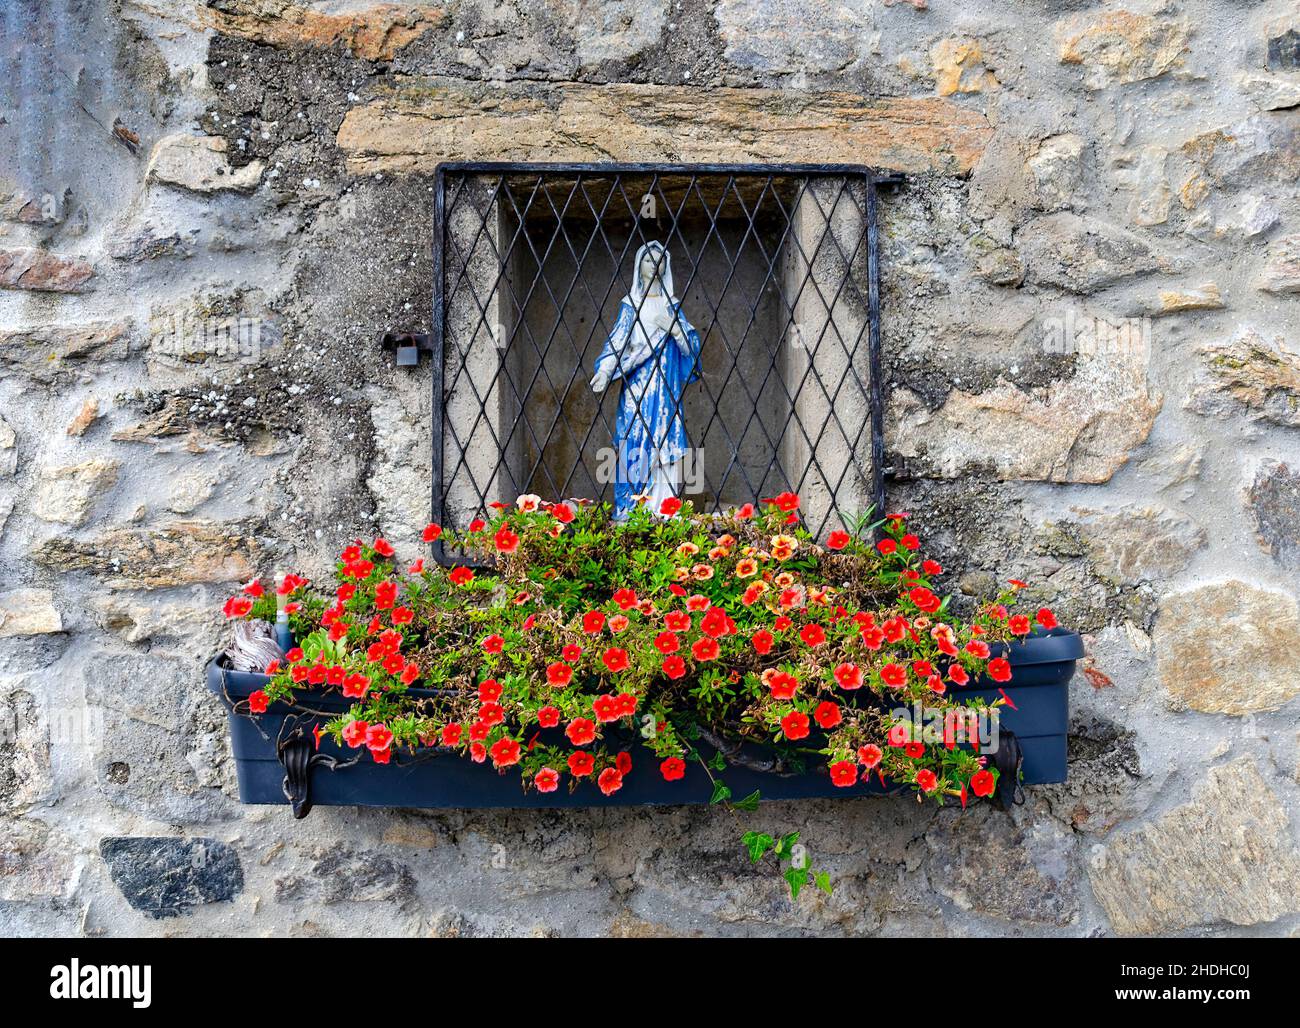 statue of the Virgin Mary in the niche of a stone wall behind an iron grid and a jardiniere with red blossoms, Austria Stock Photo